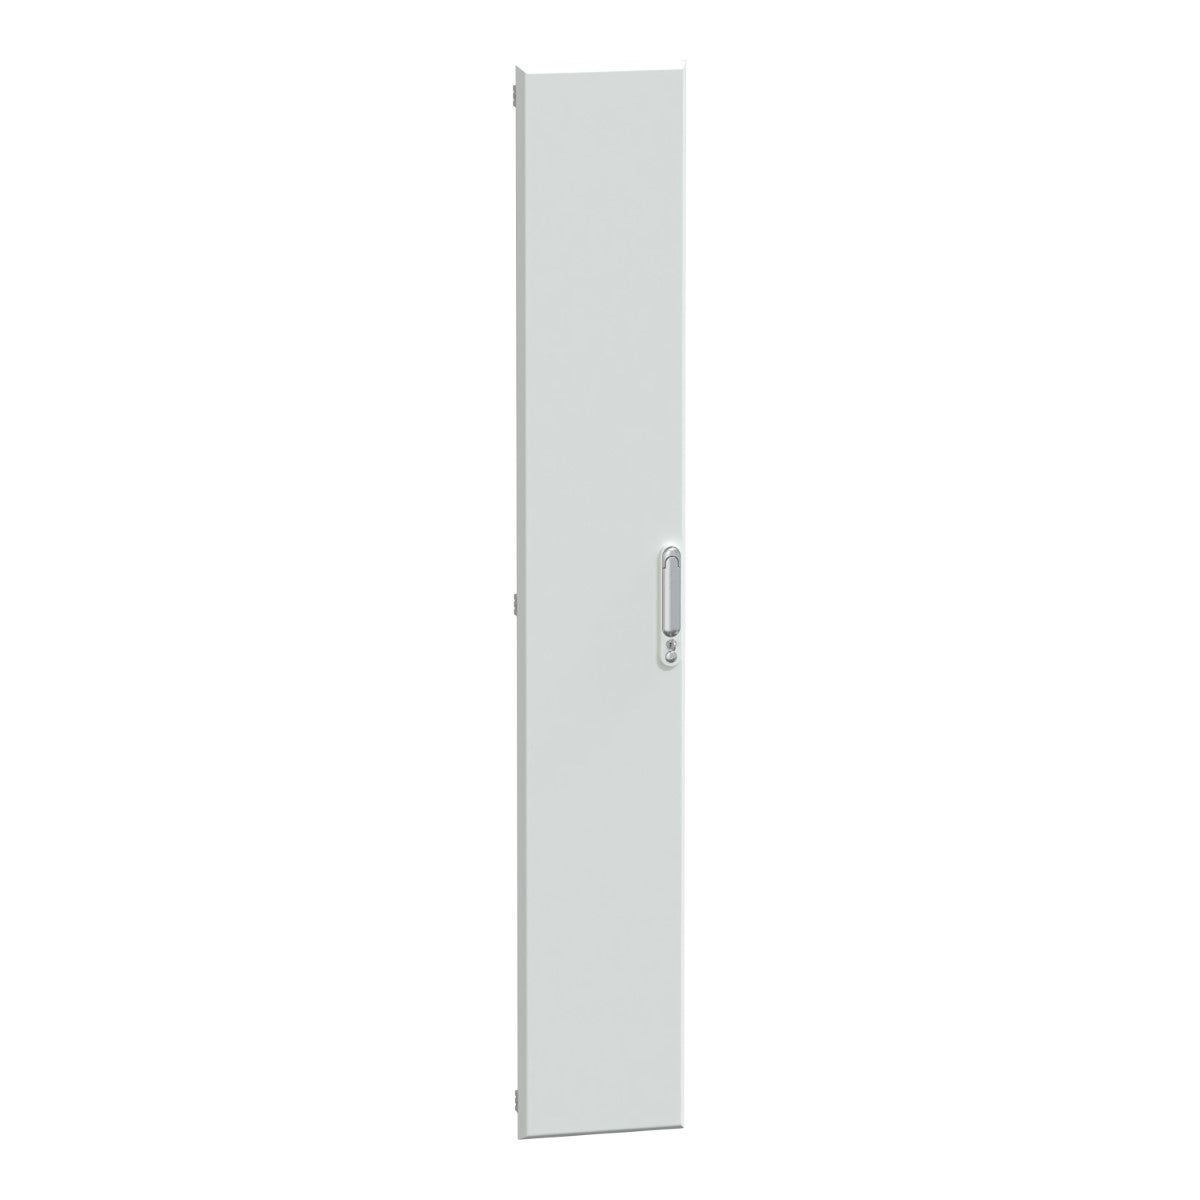 Door, PrismaSeT G, plain type for duct, 36M, W300, IP30, white, RAL 9003